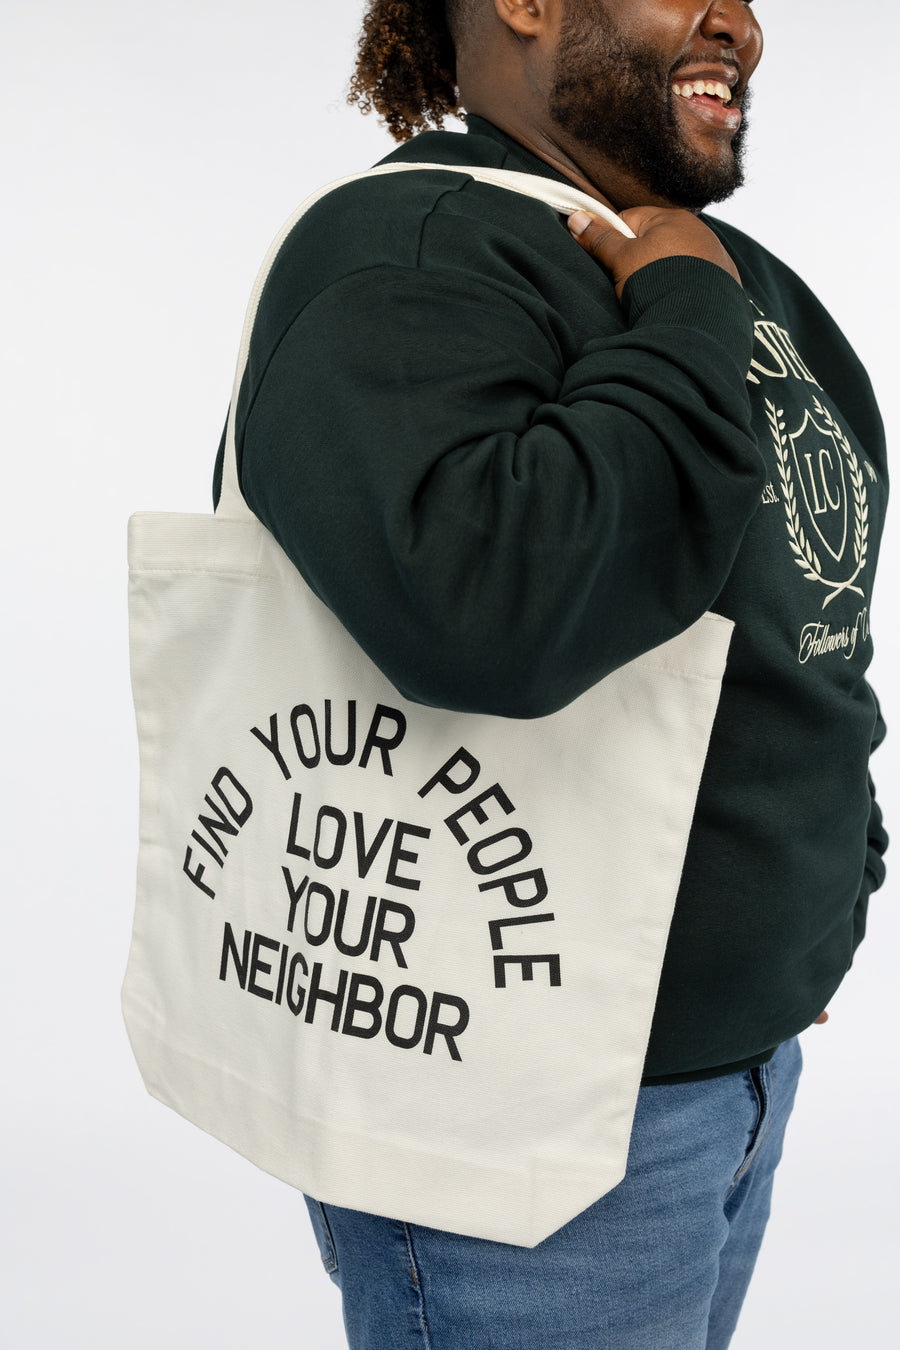 Find Your People, Love Your Neighbor Tote